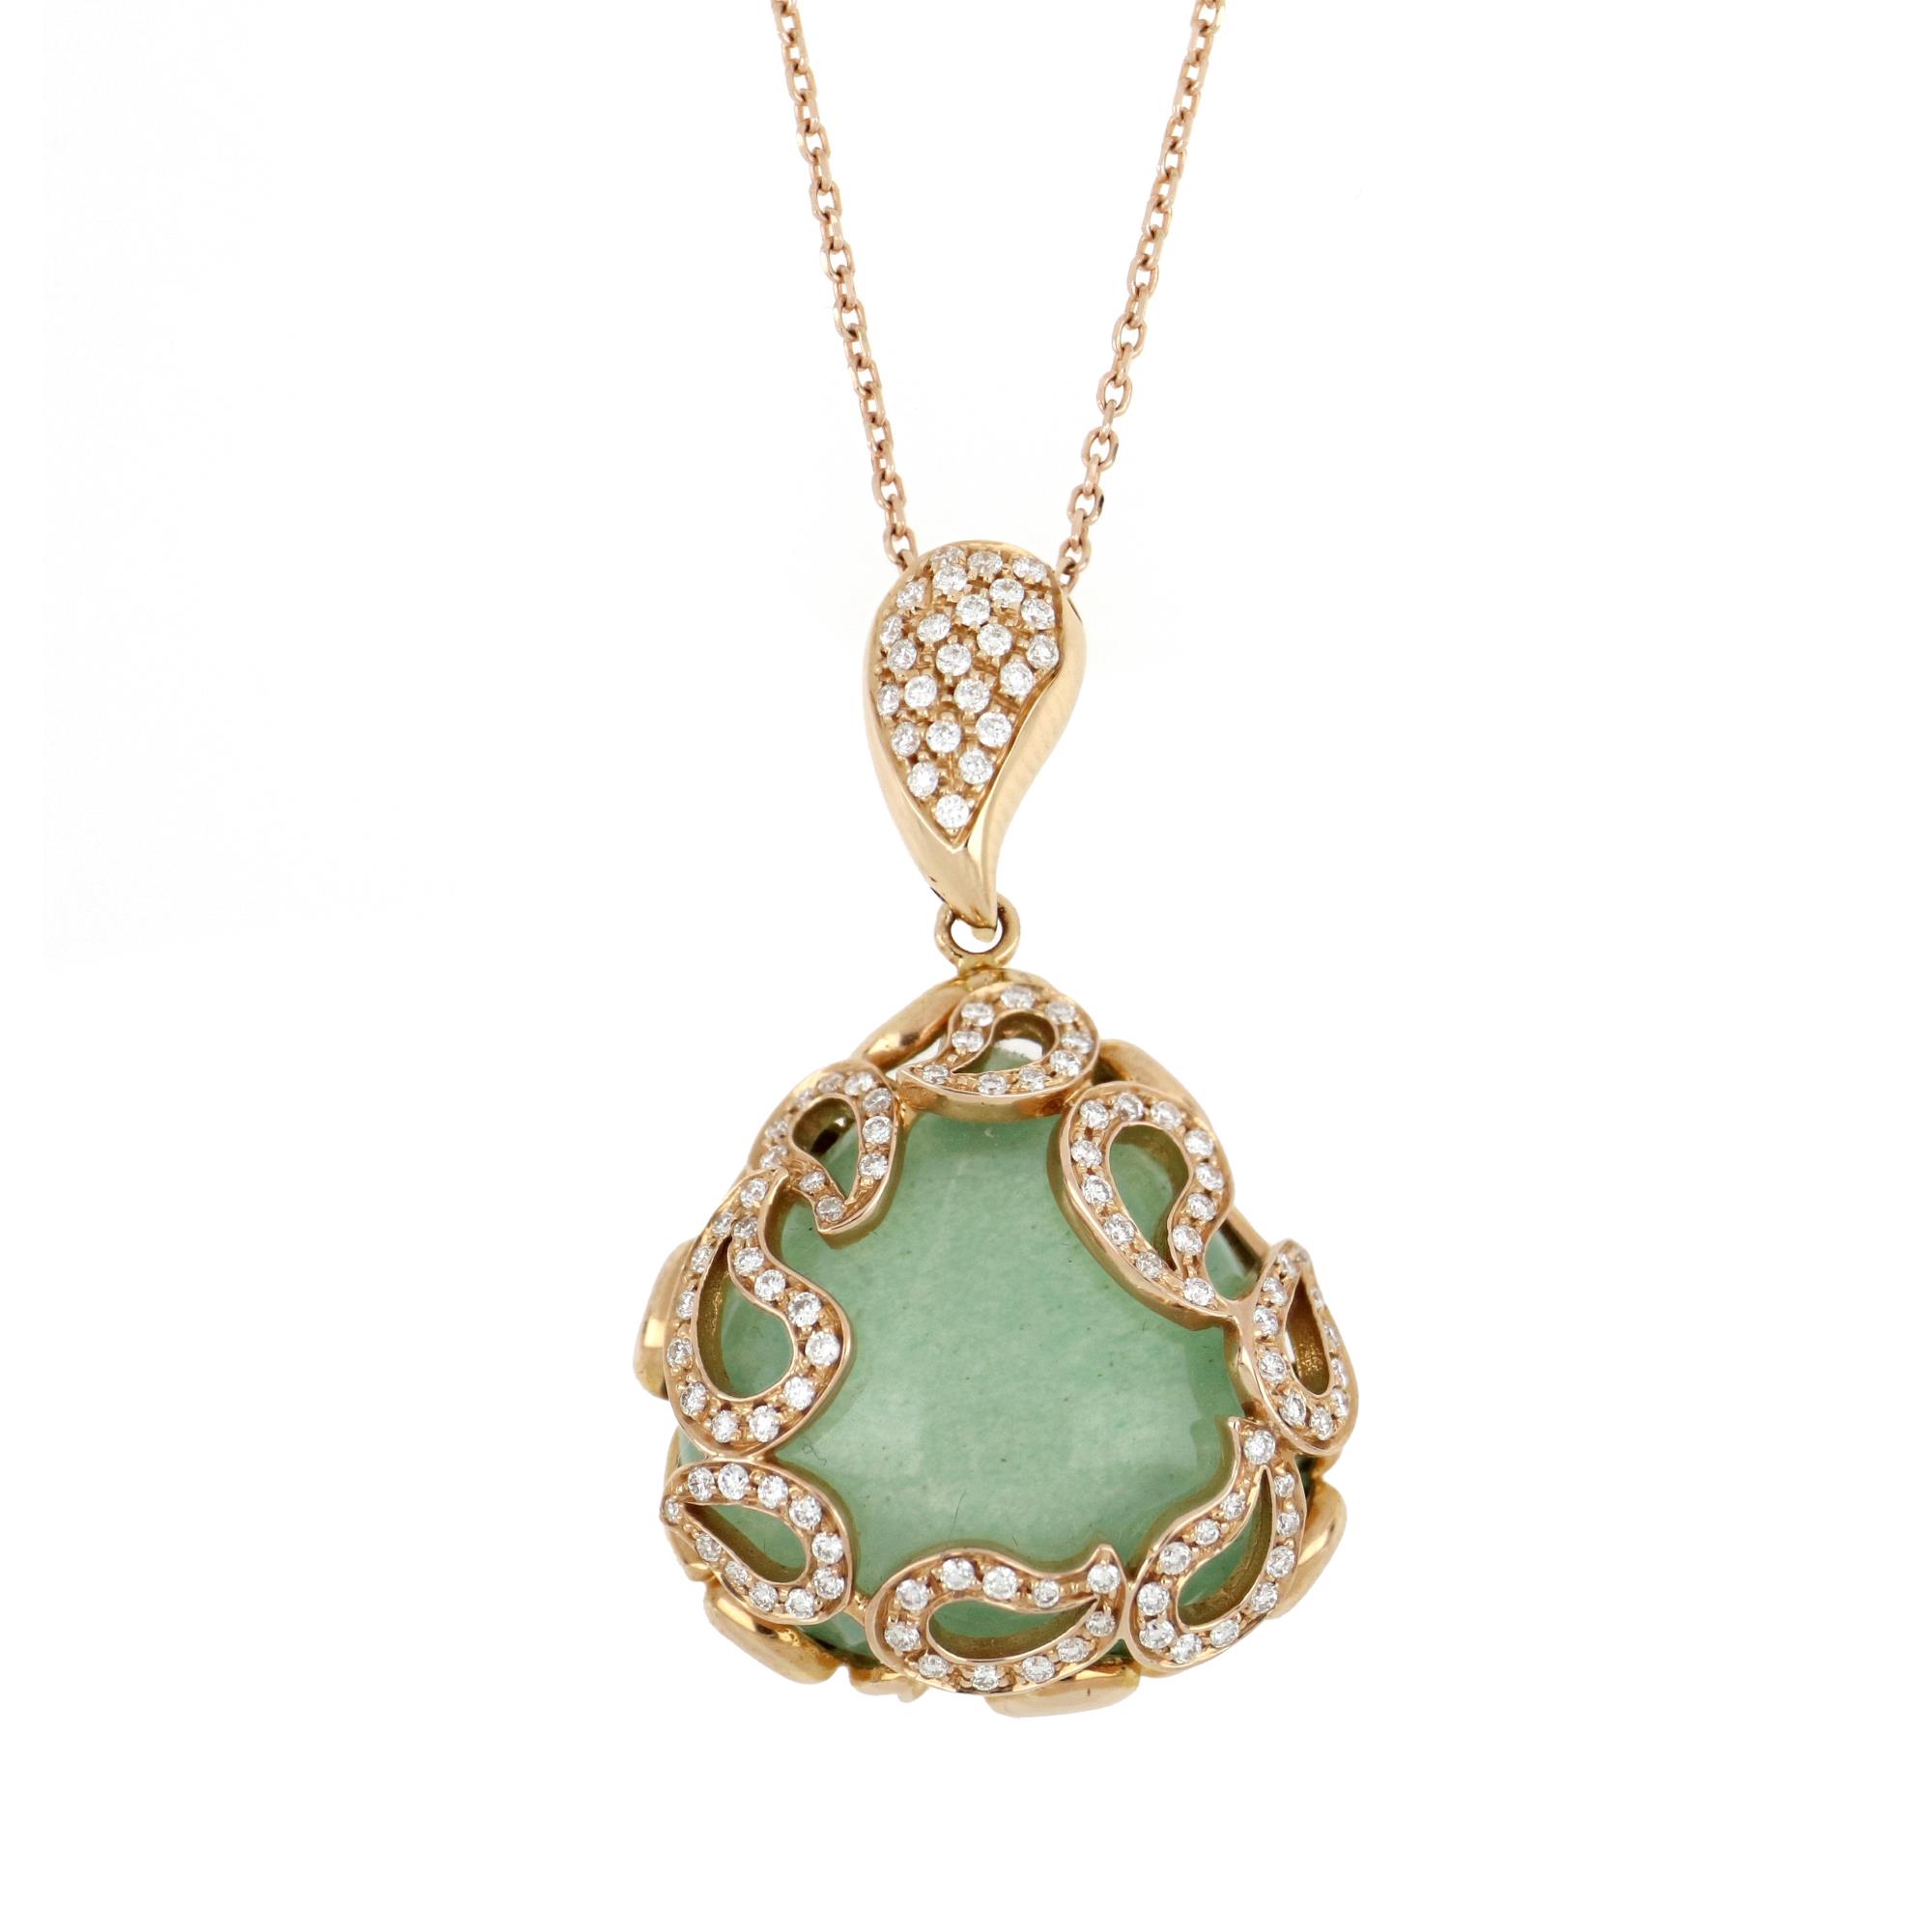 Rose gold necklace with green aventurine and diamonds - GOLD ART